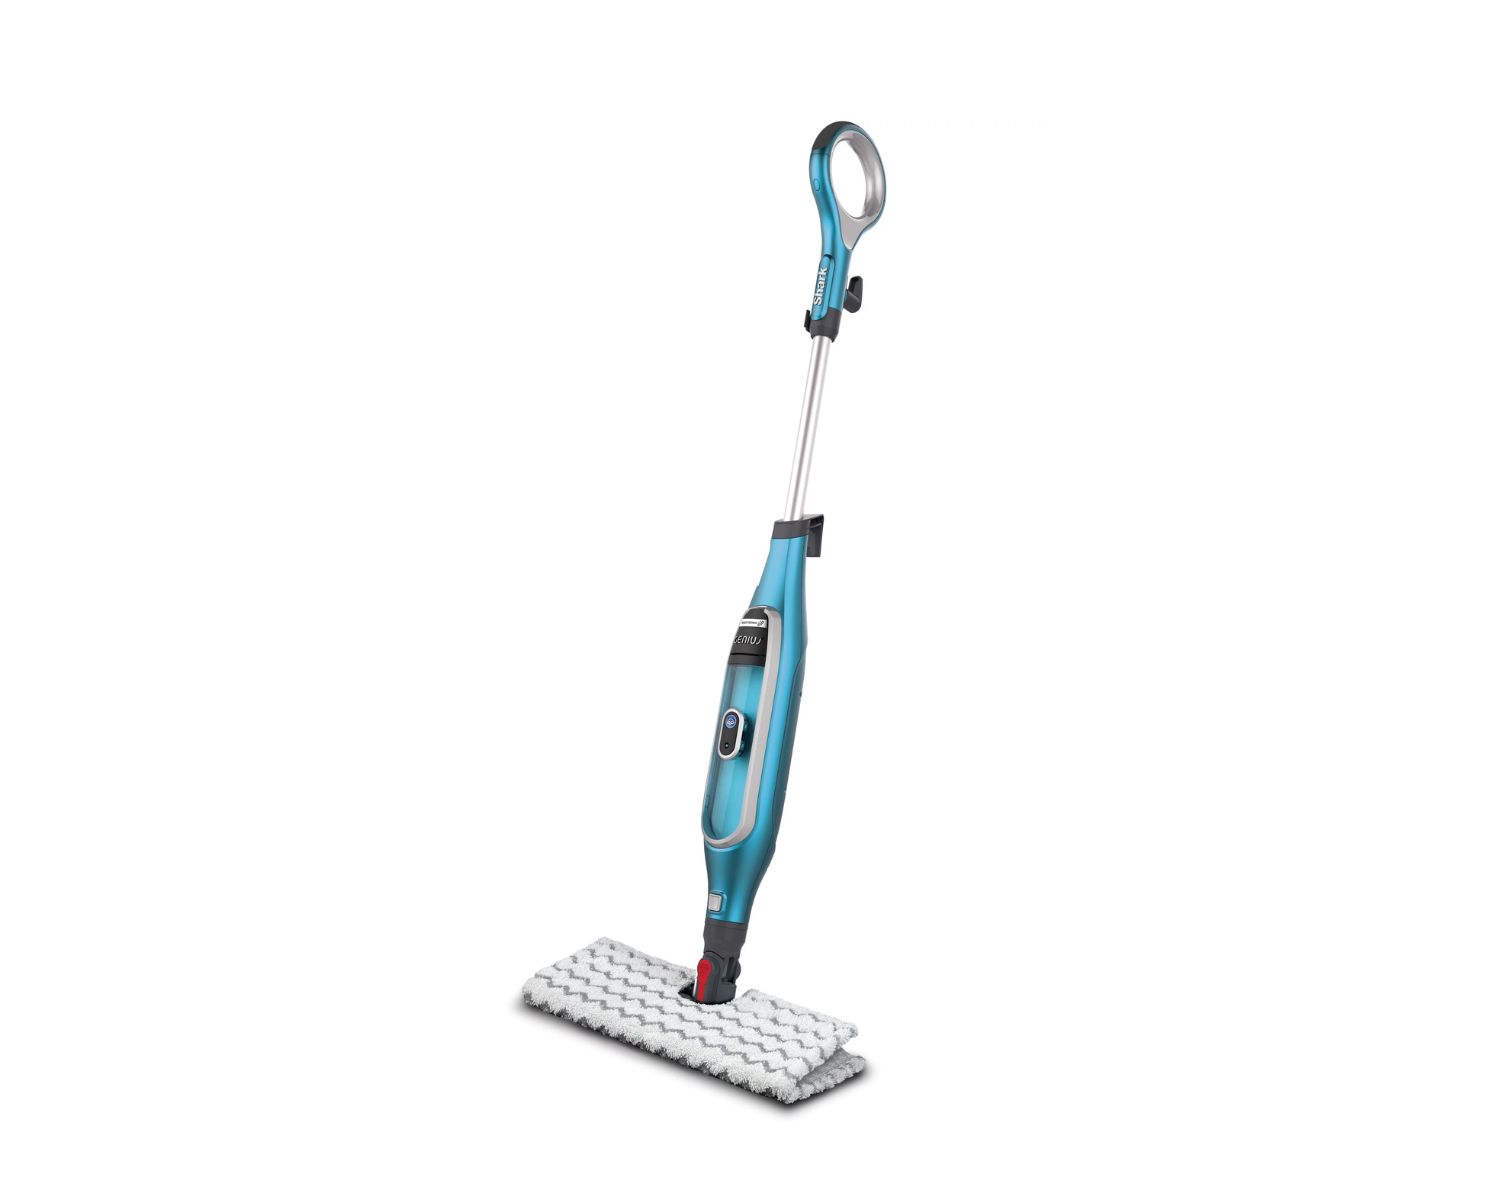 How To Use Shark Steam Pocket Mop